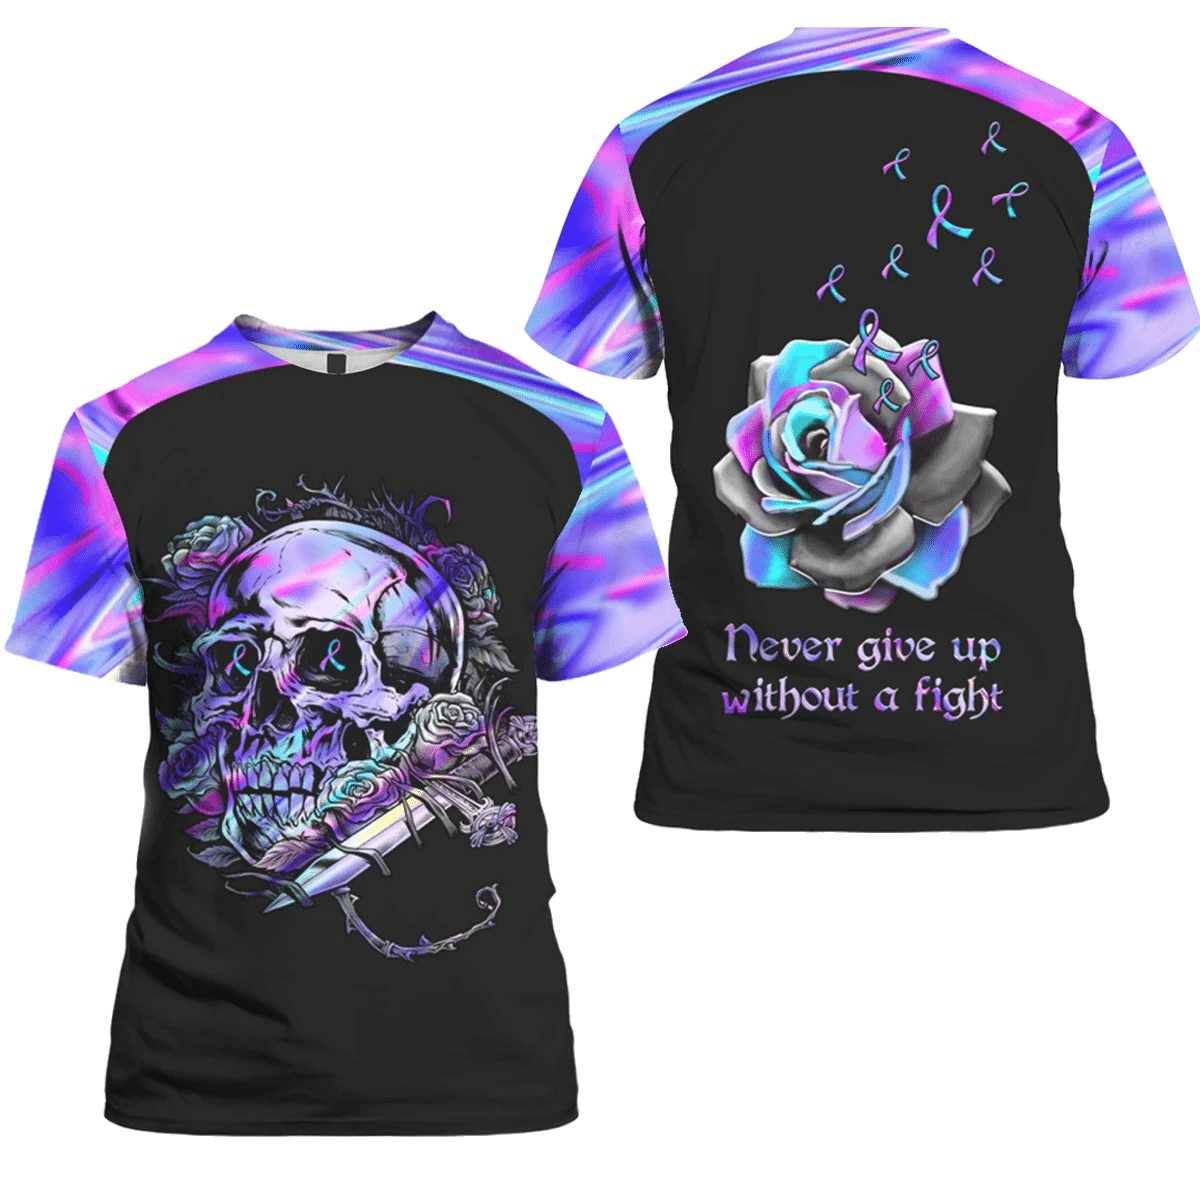 Suicide Awareness Rose, Never Give Up Without A Fight 3D Printed Shirt Style: 3D T-Shirt, Color: Black